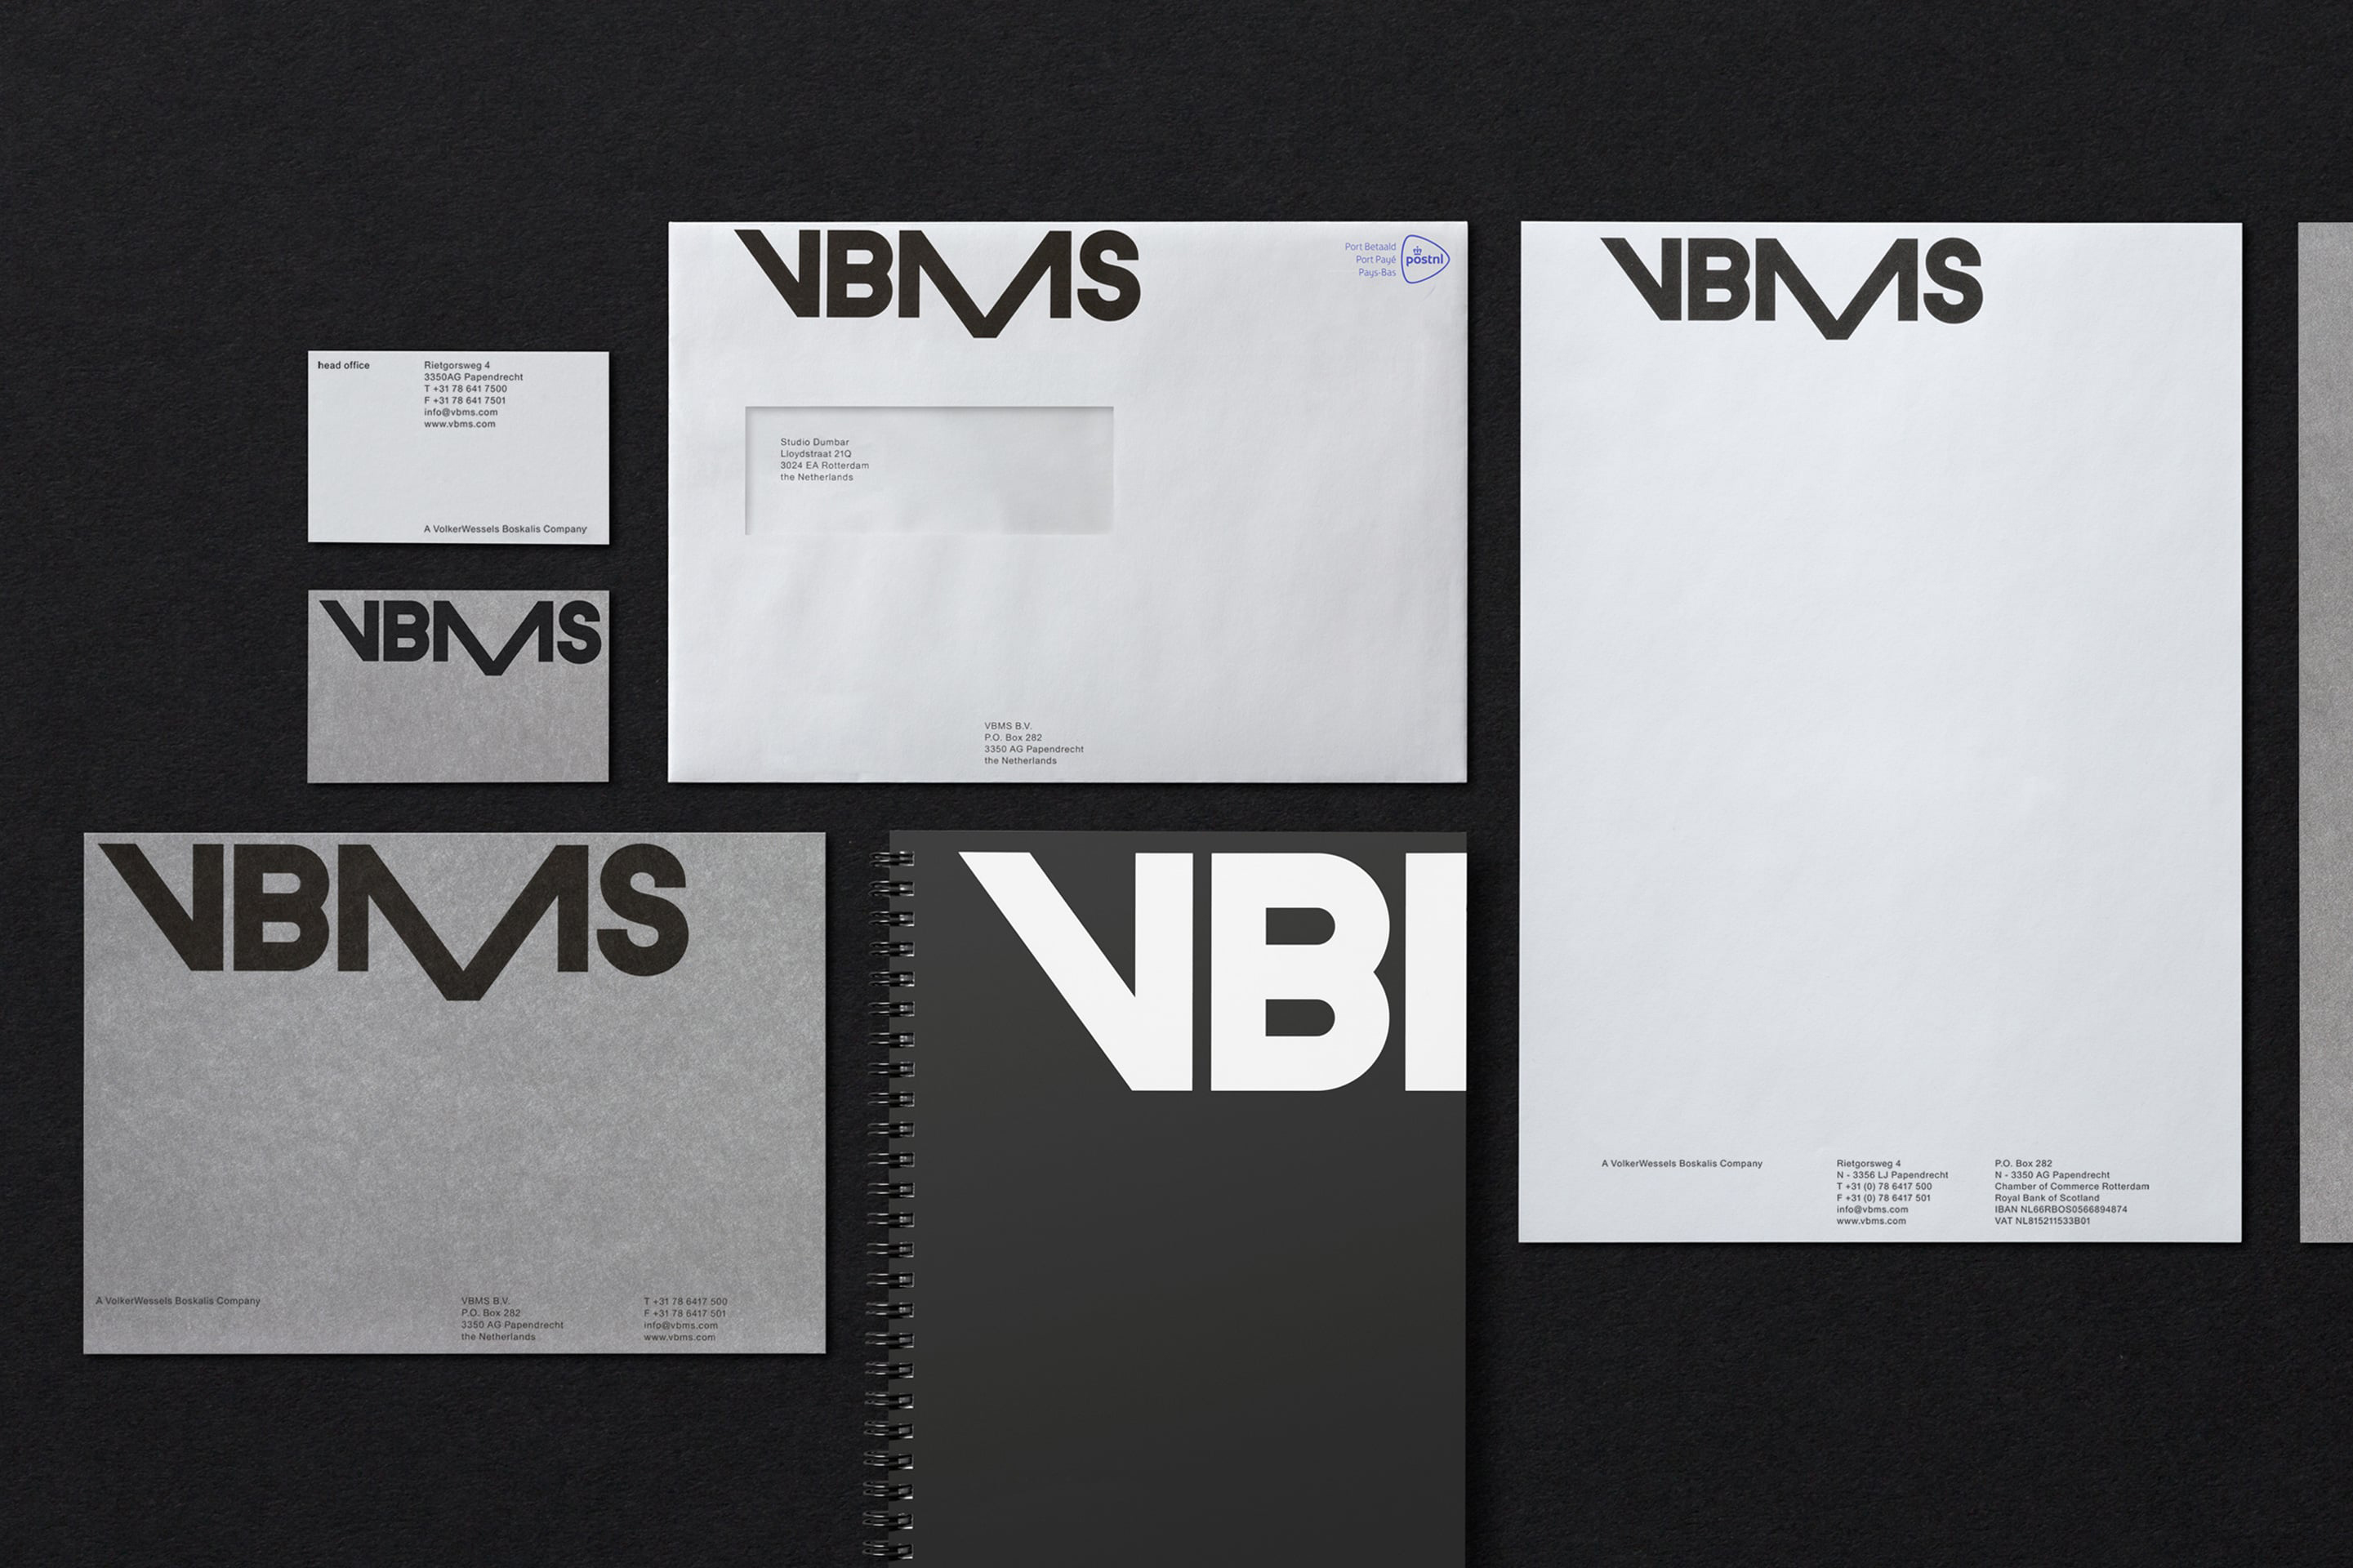 VBMS logo, visual identity and stationery by Studio Dumbar